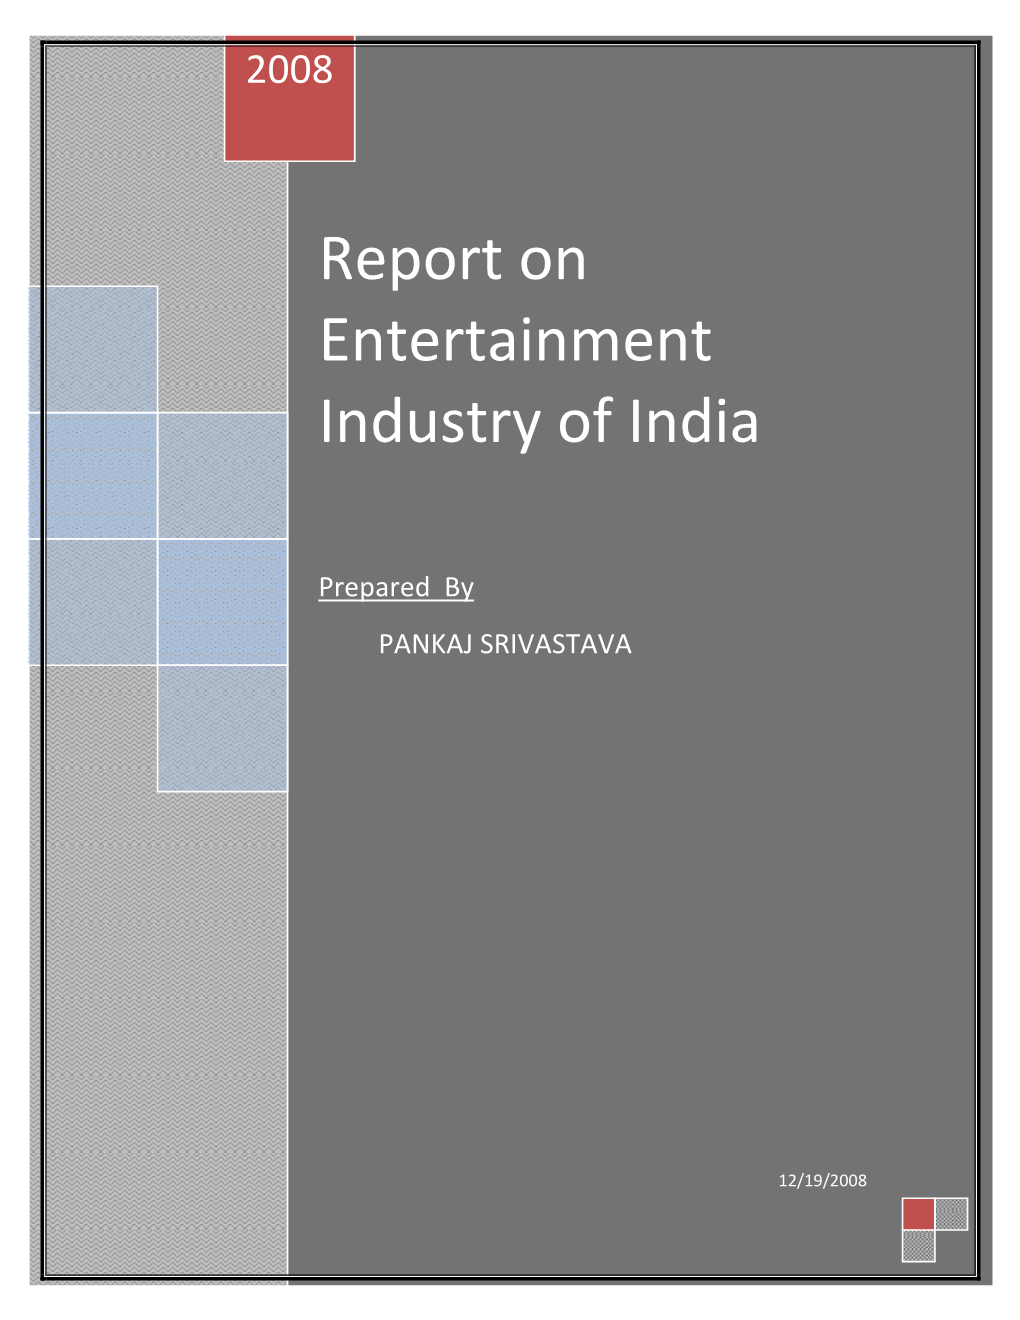 Entertainment Industry of India